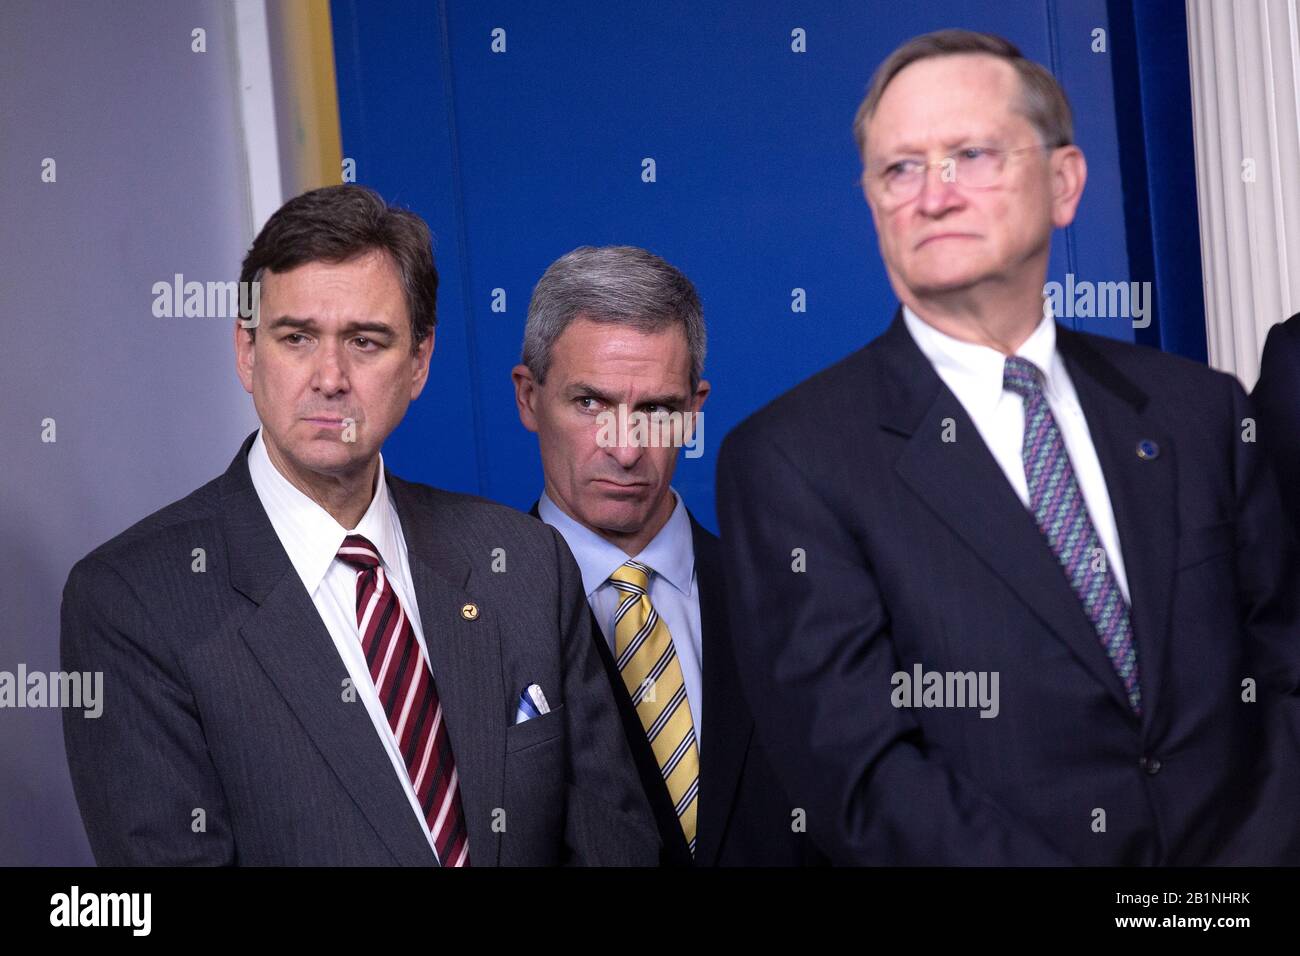 Acting Director of the United States Citizenship and Immigration Services Ken Cuccinelli, center, listens as United States President Donald J. Trump delivers remarks during a news conference in the James S. Brady Briefing Room of the White House in Washington, DC, U.S., on Wednesday, February 26, 2020. Trump, joined by members of the Coronavirus Task Force, attempted to lessen concerns over the Coronavirus after health officials told lawmakers that it is seemingly inevitable that the disease will spread in the United States. Credit: Stefani Reynolds/CNP /MediaPunch Stock Photo